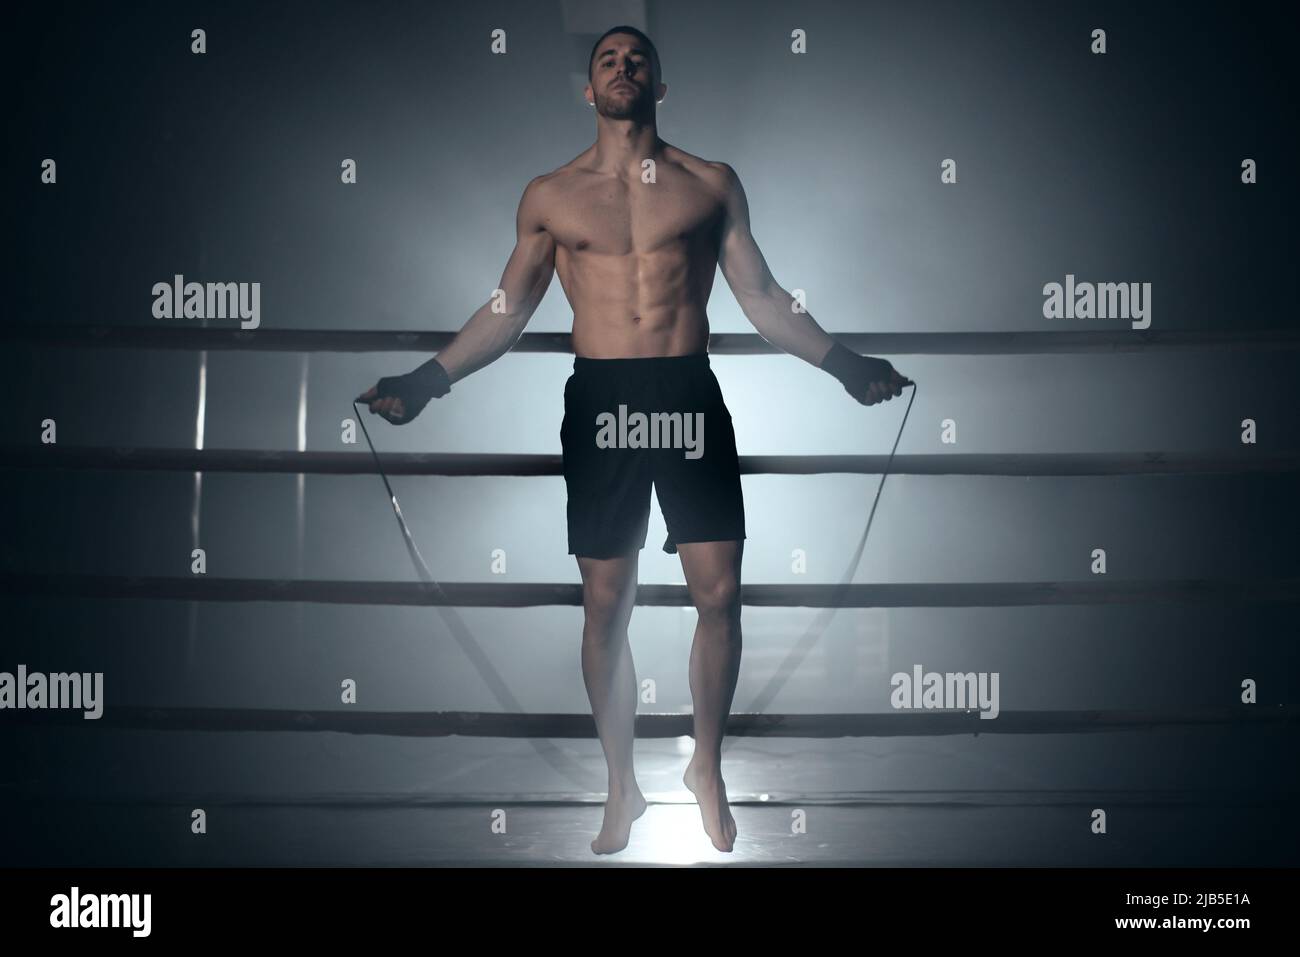 Boxer jumping rope in boxing ring. High quality photo. Stock Photo